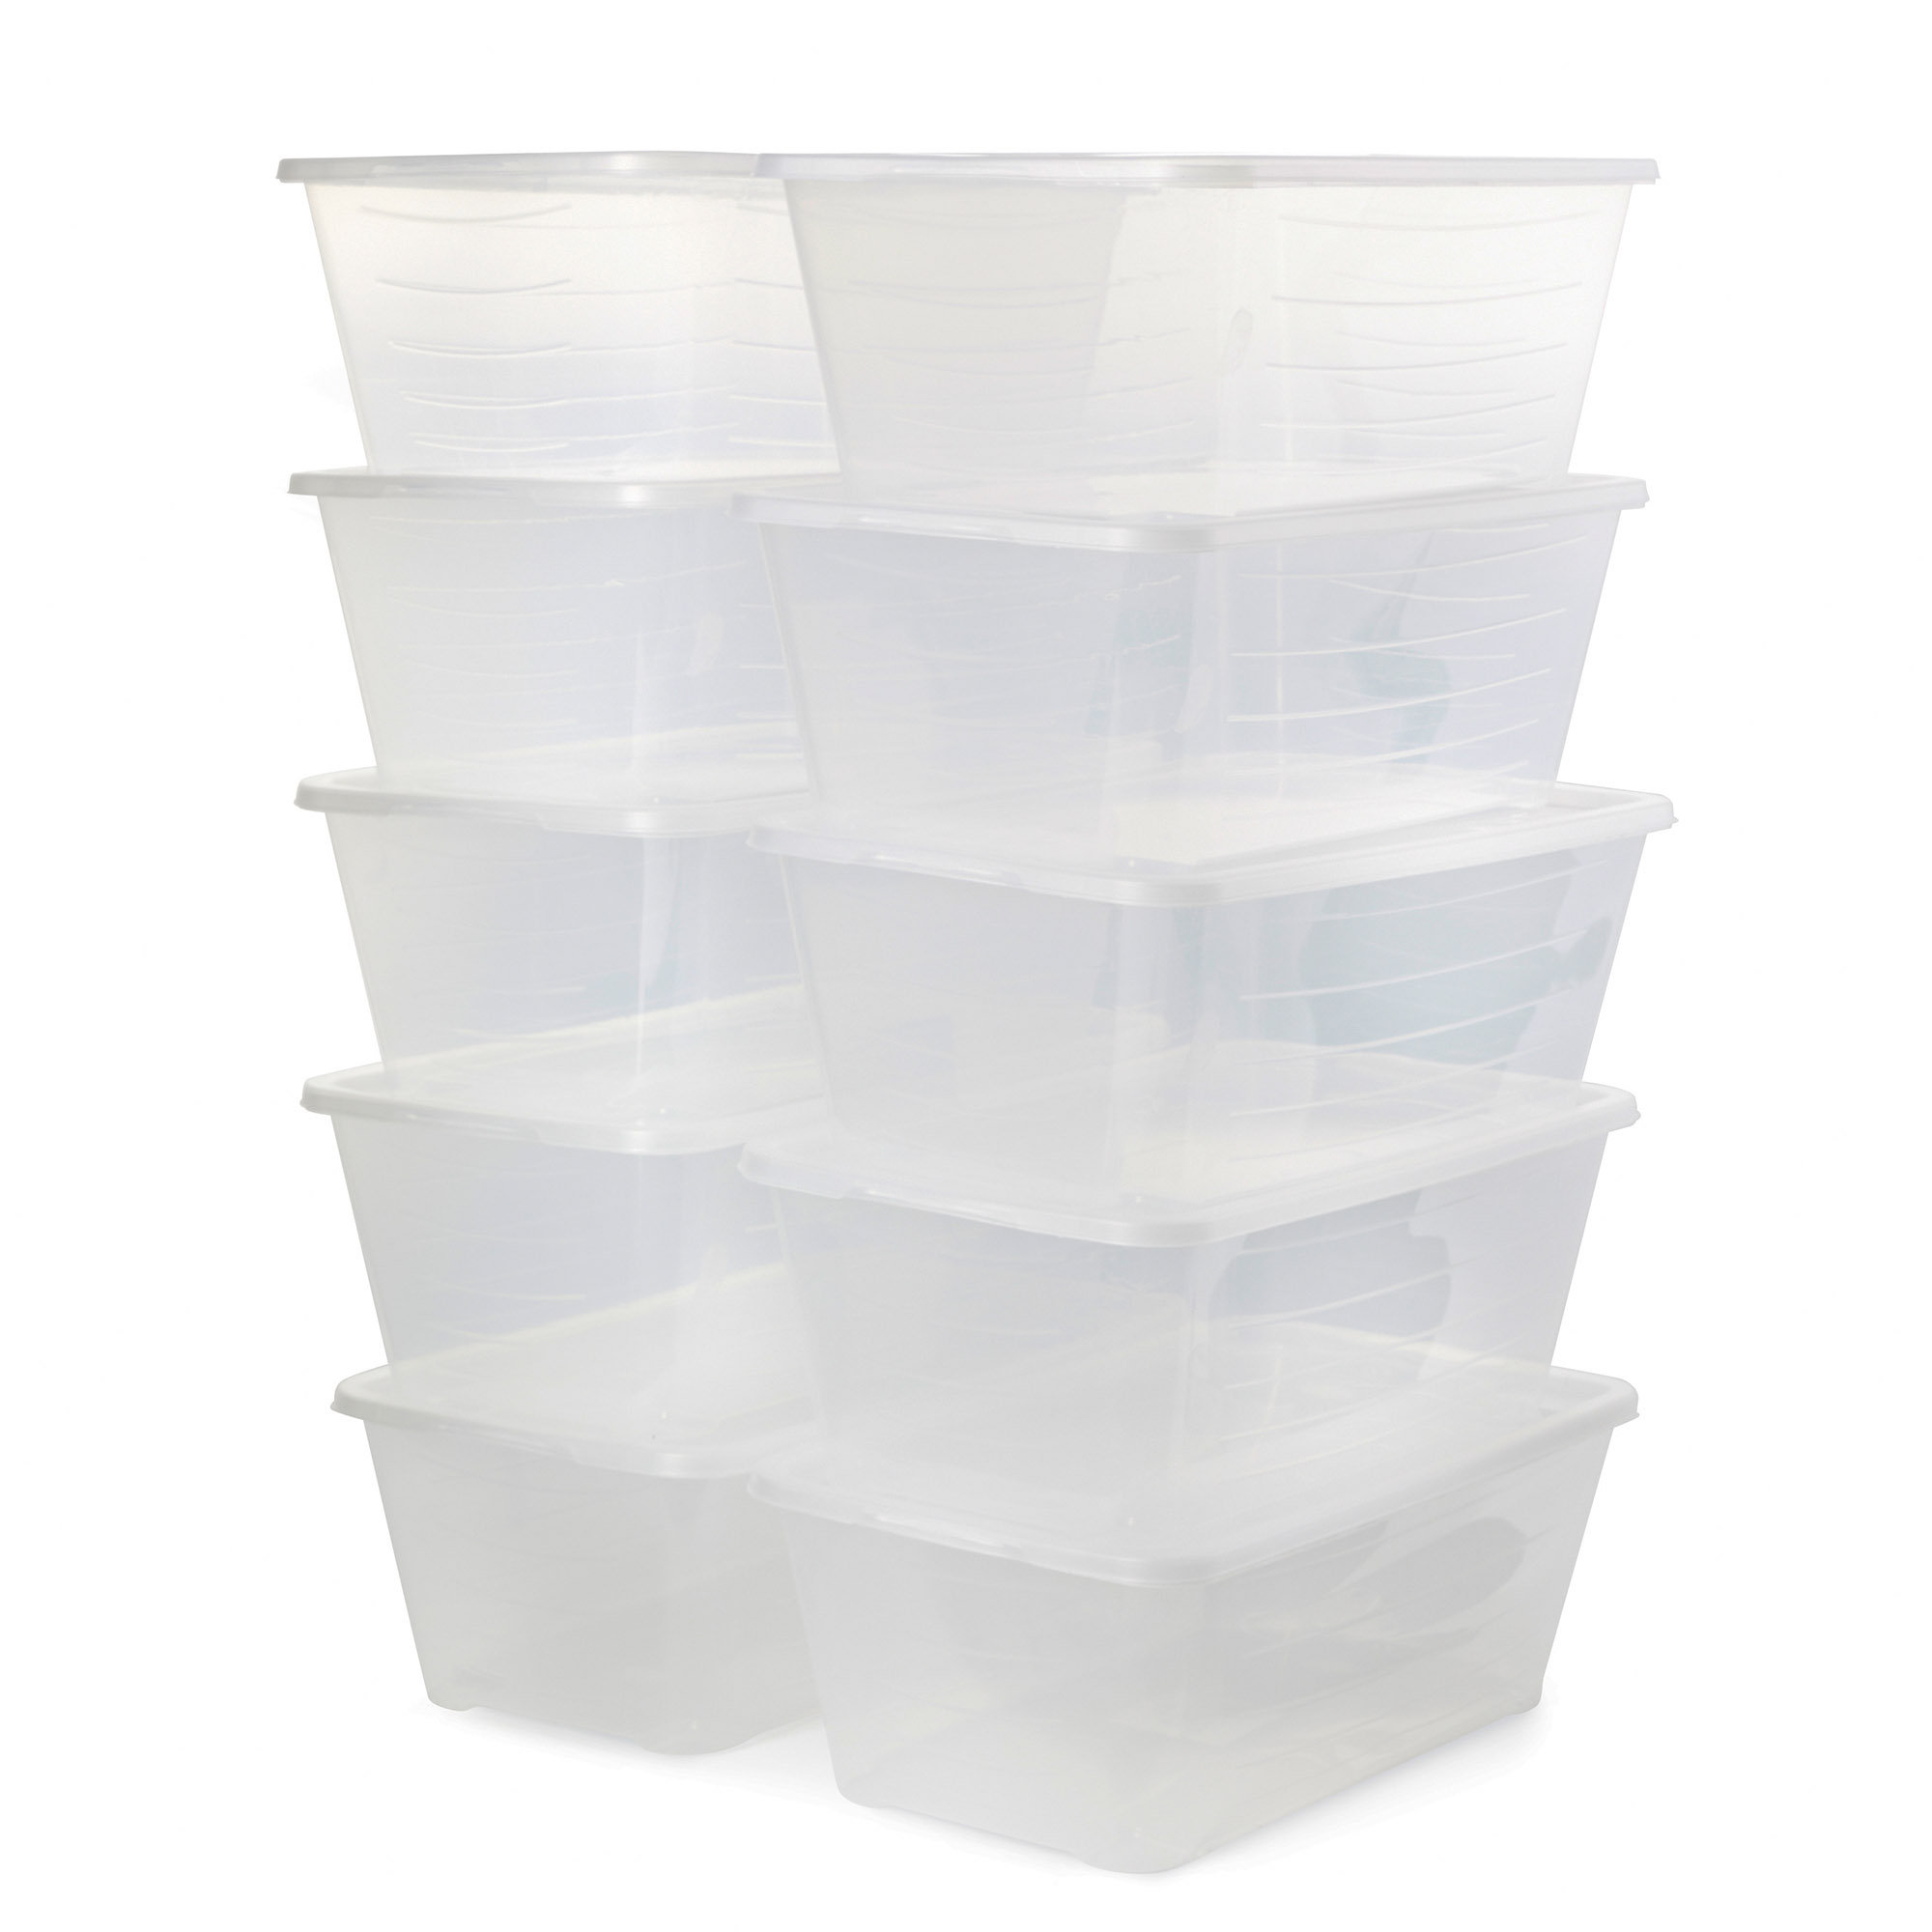 Life Story Clear Stackable Closet & Storage Box 55 Quart Containers (12 Pack)